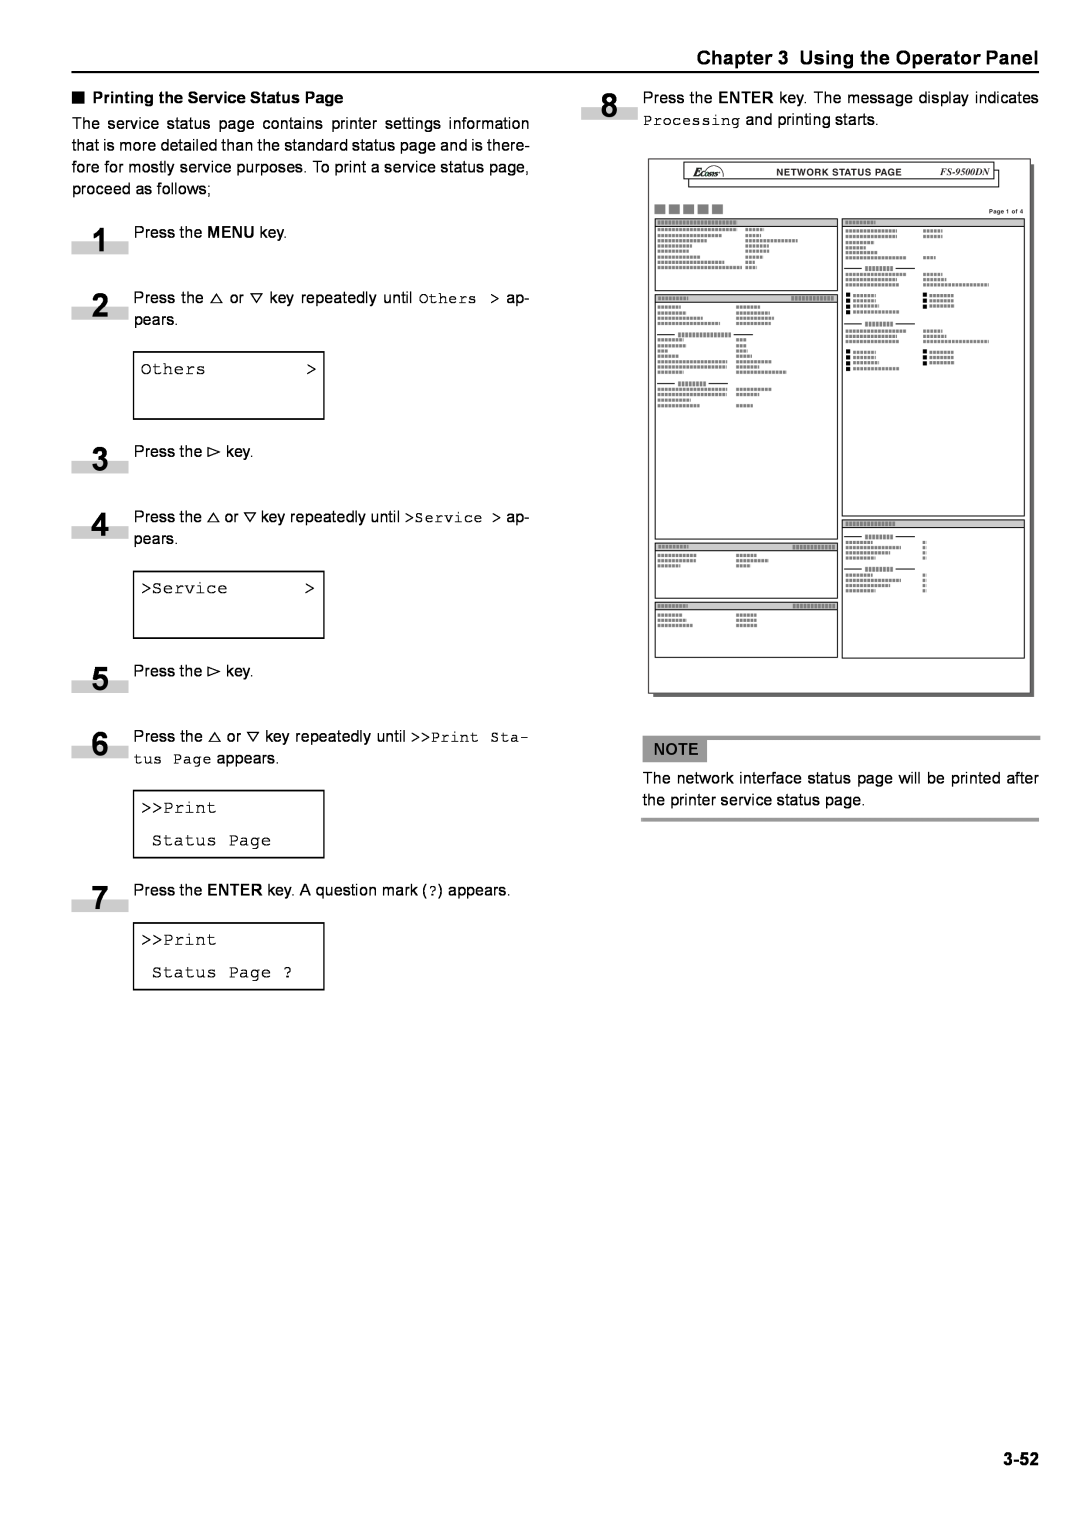 Kyocera S-9100DN manual Using the Operator Panel, Others >, >Service >, >>Print Status Page ?, 3-52 